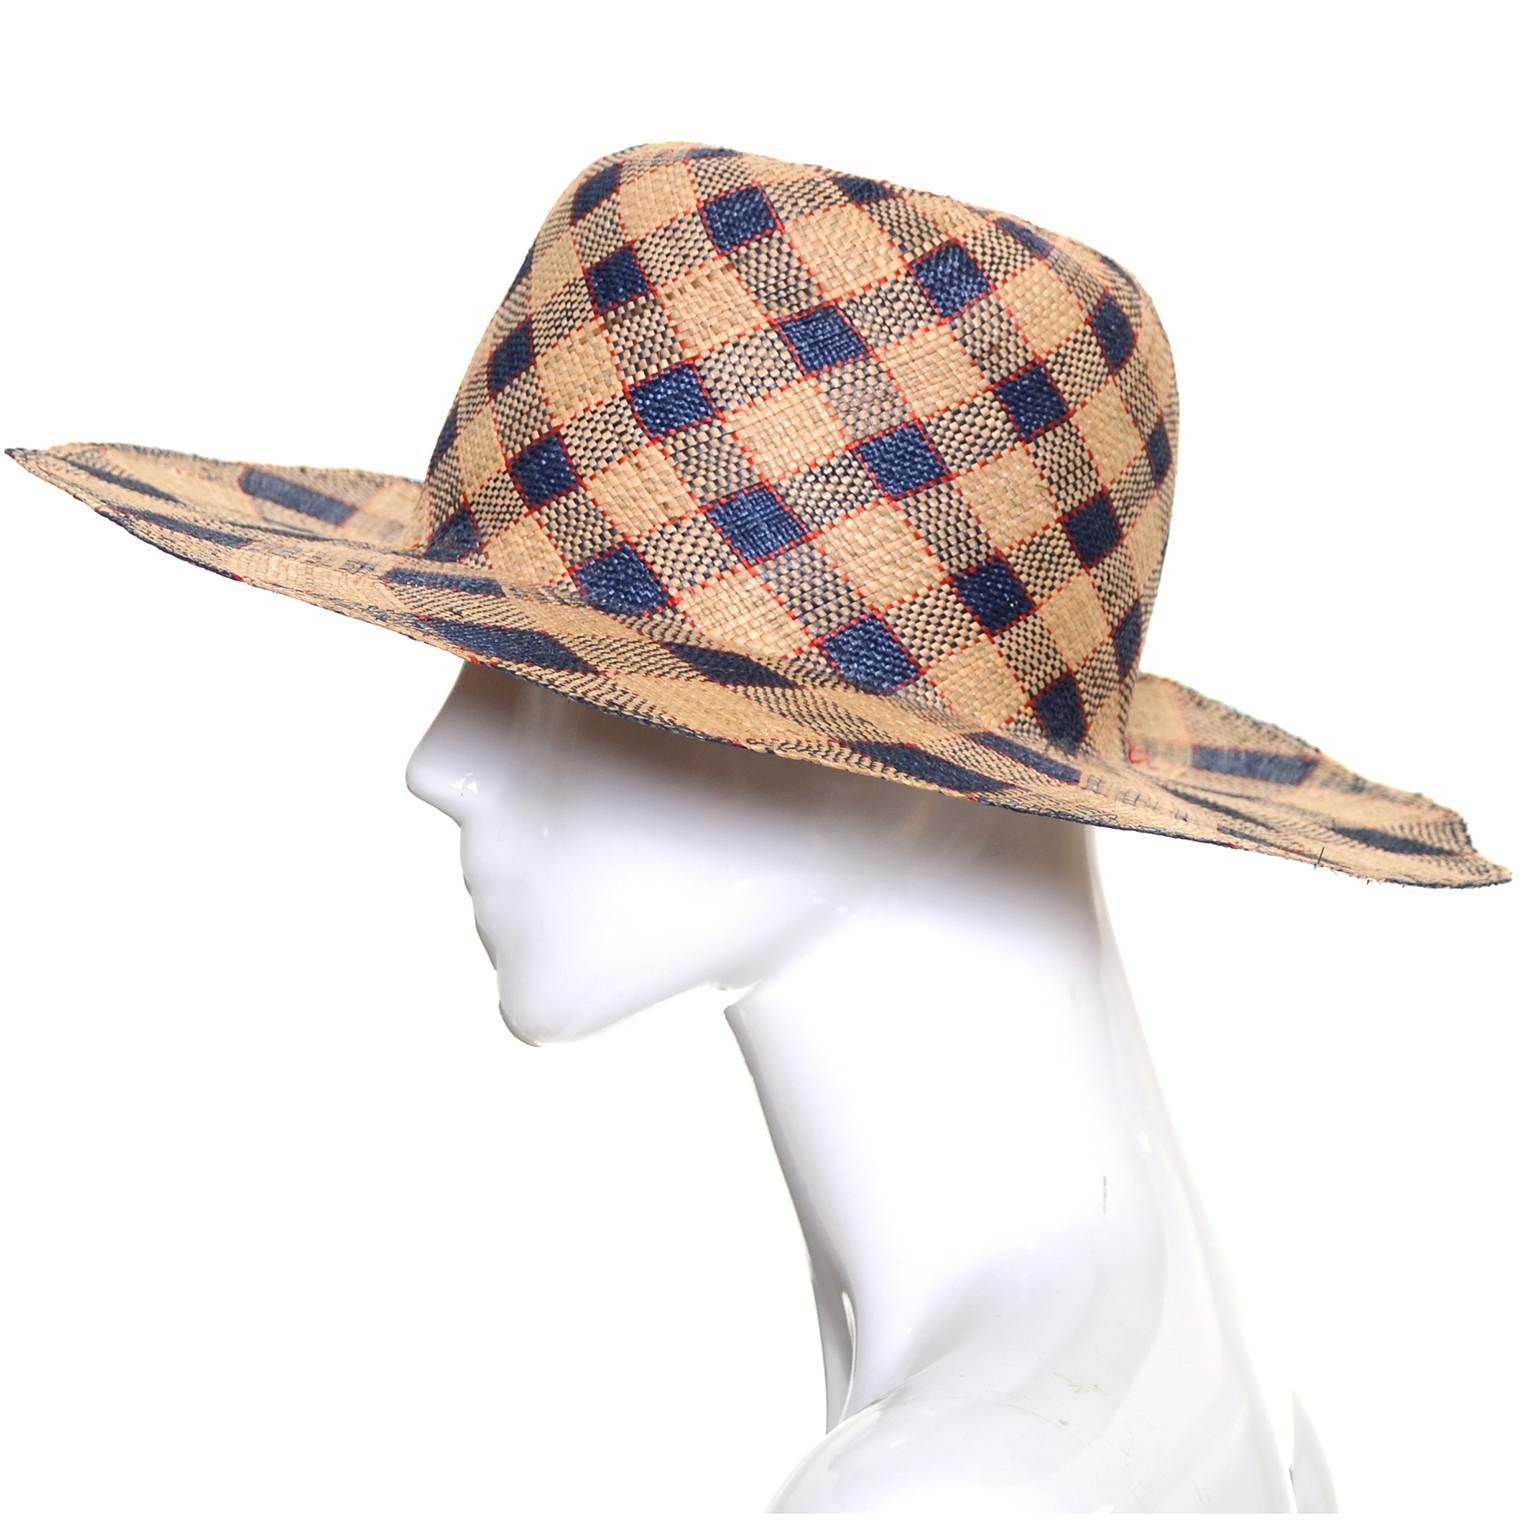 This vintage hat was designed by Therese Ahrens and was purchased at Bullock's Wilshire in the late 1960's.  This straw hat is navy and natural plaid with fine red lines and the shape is a nonagon with 9 squared off edges.  This hat came from an